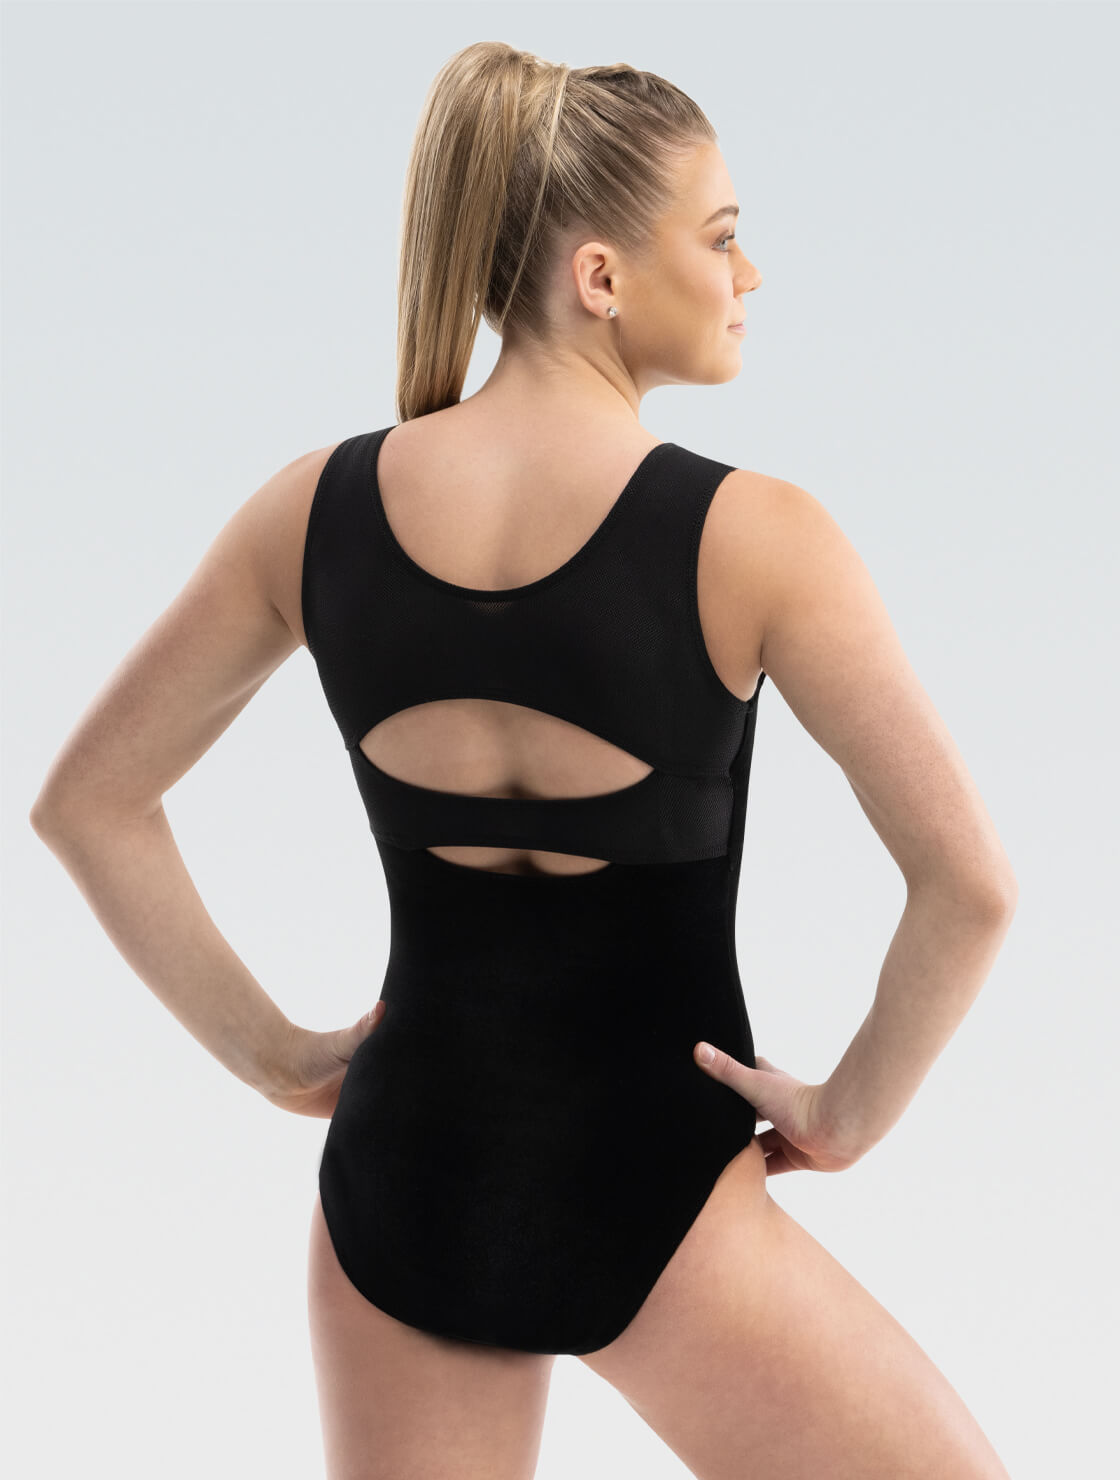 GK Elite GymTek Cool Air Leotard Style 3744  Dancy Pantz Boutique: For all  your dance and fitness needs!